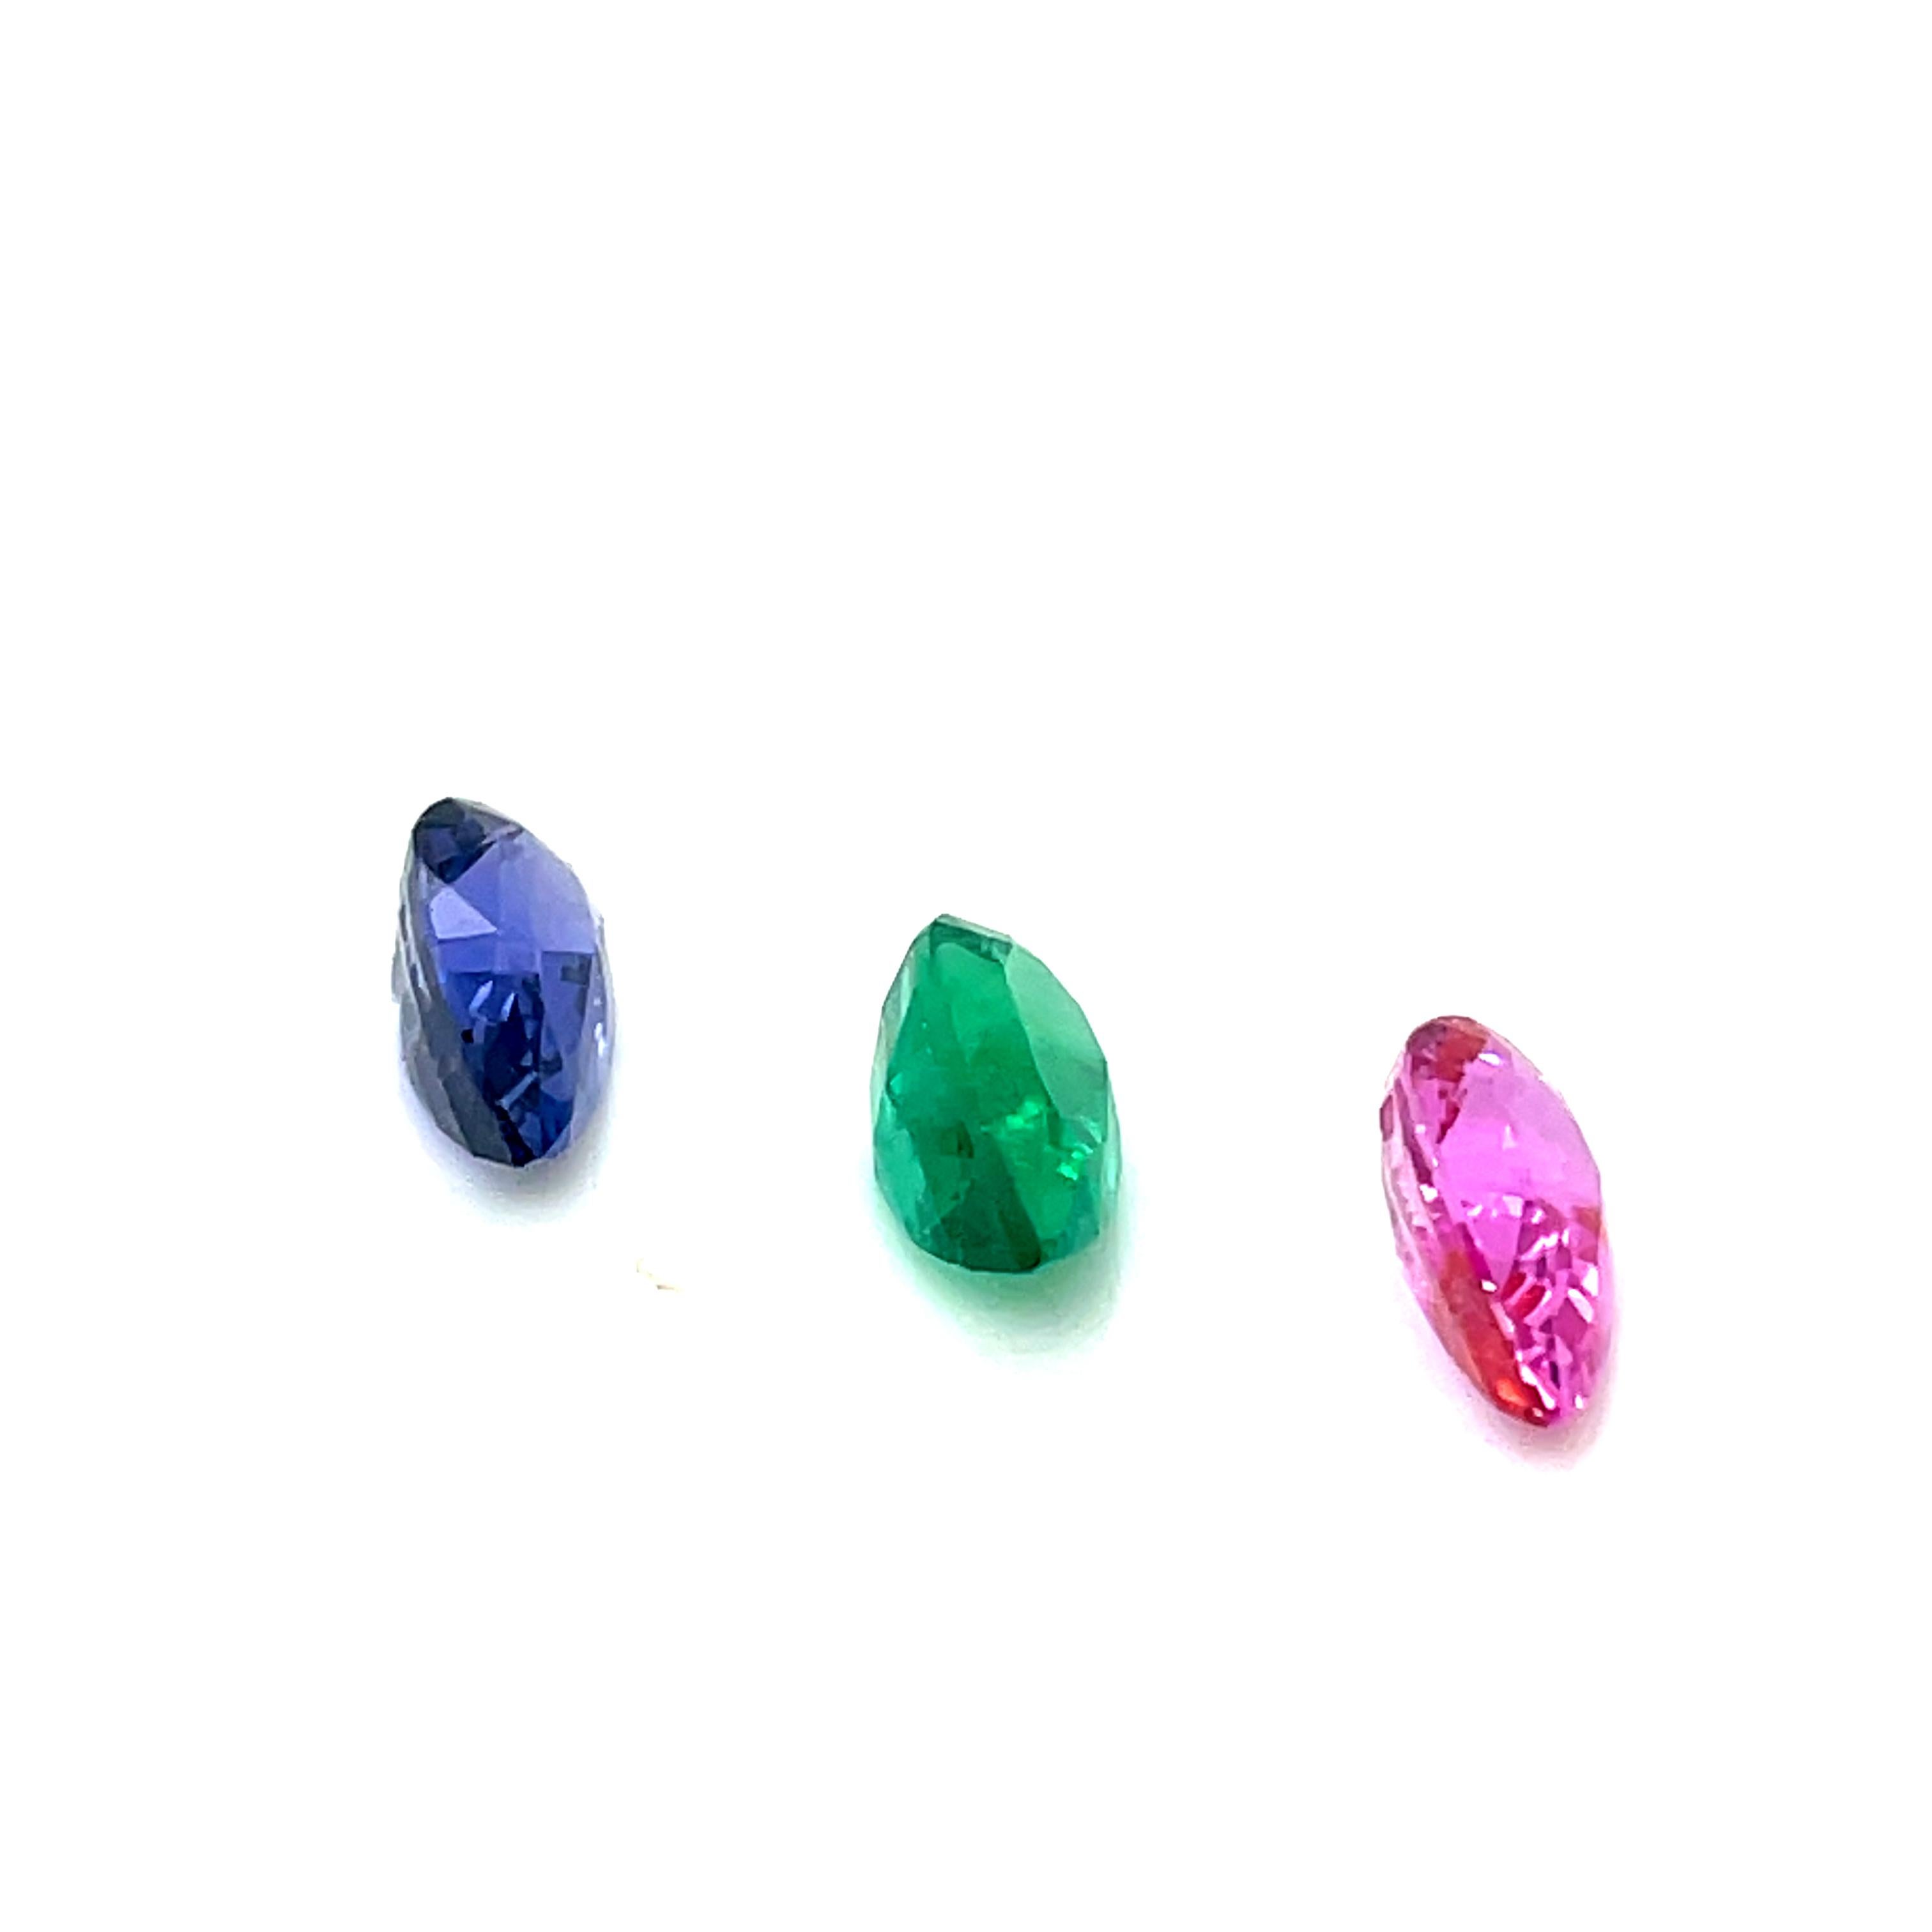 Pear Cut Natural Blue Sapphire Pear and Pink Sapphire Pear & Emerald Pear Loose Gemstones For Sale